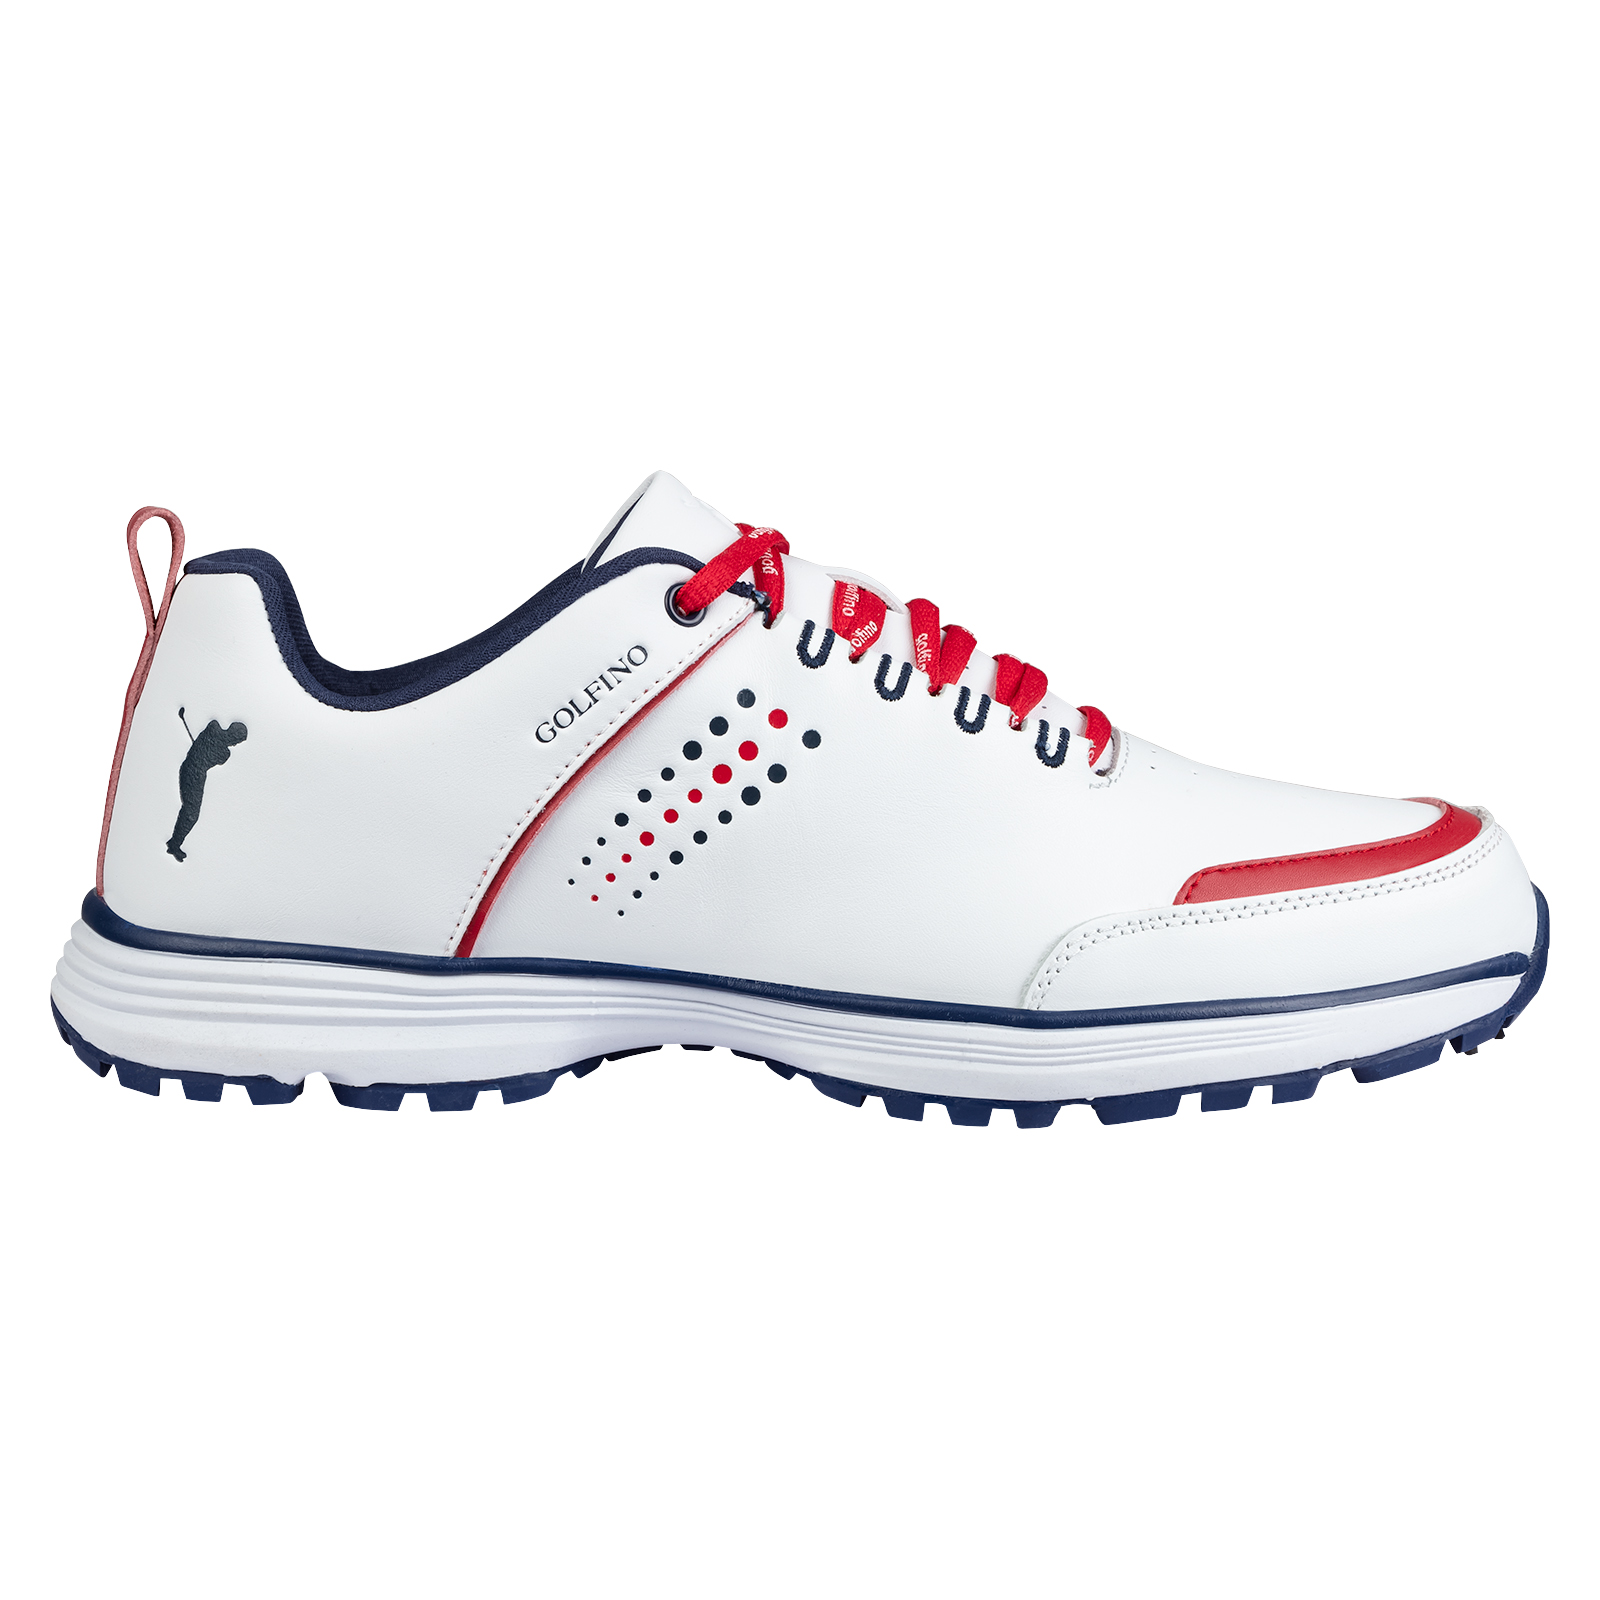 Men's genuine leather golf shoes with spikes in a modern design 